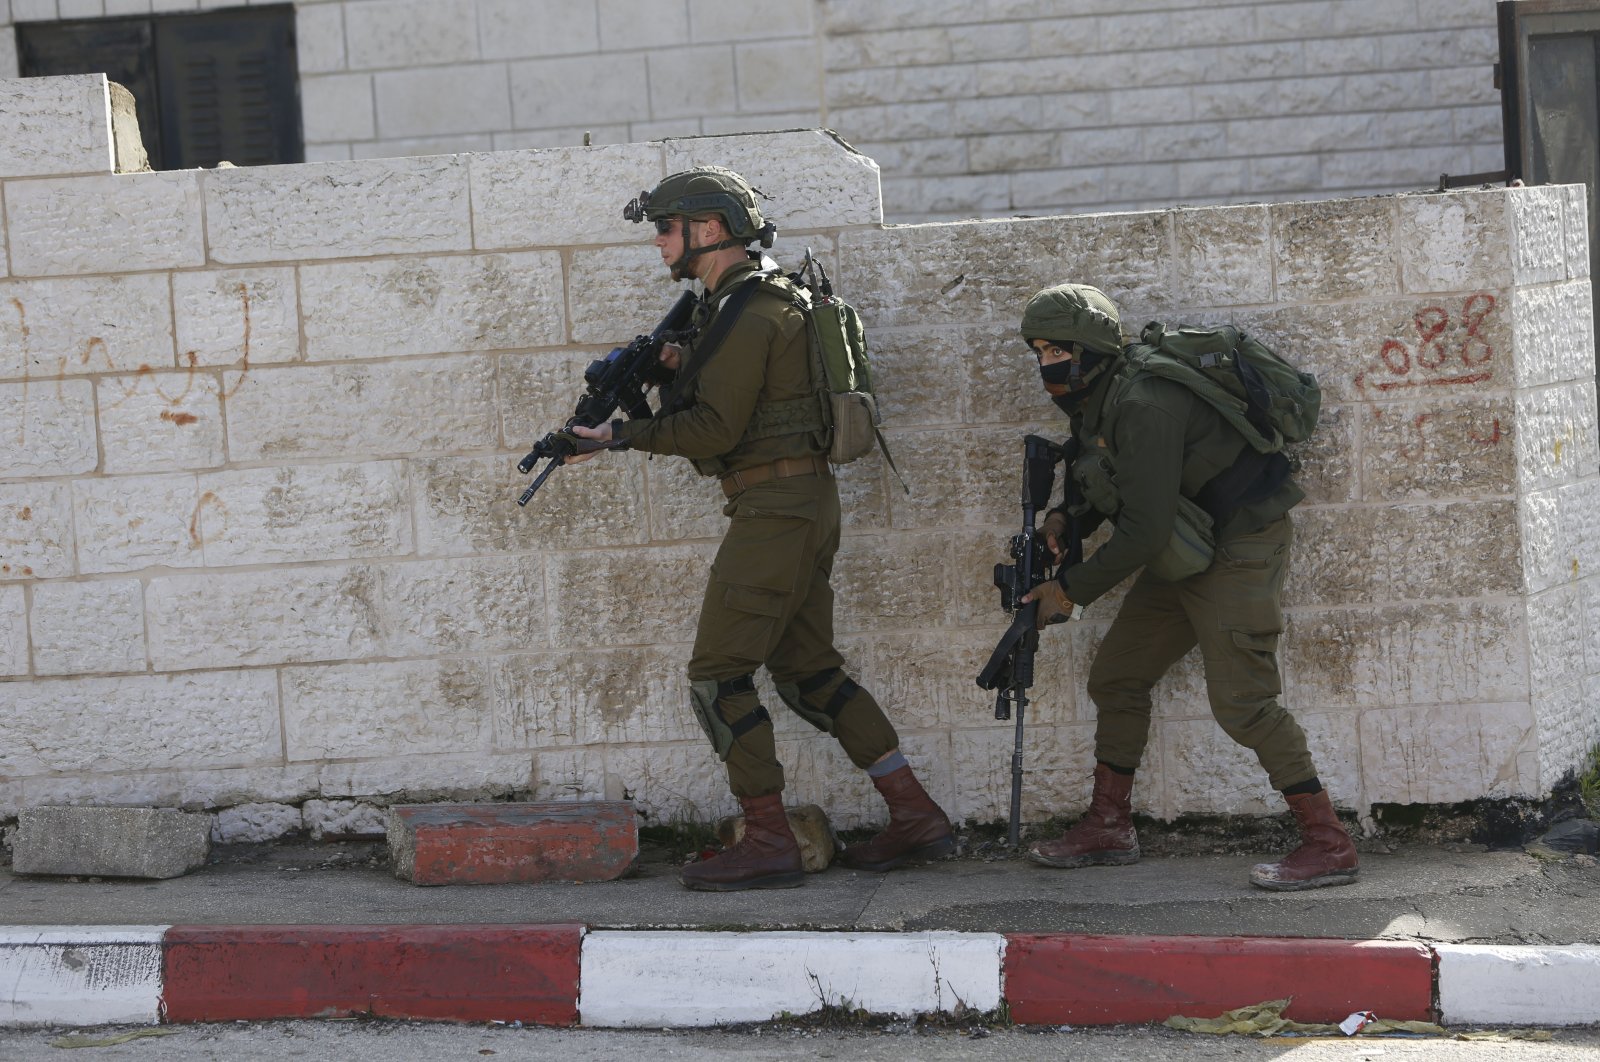 Israeli soldiers conduct an operation in Ramallah, occupied West Bank, Palestine, Dec. 10, 2018. (AP Photo)